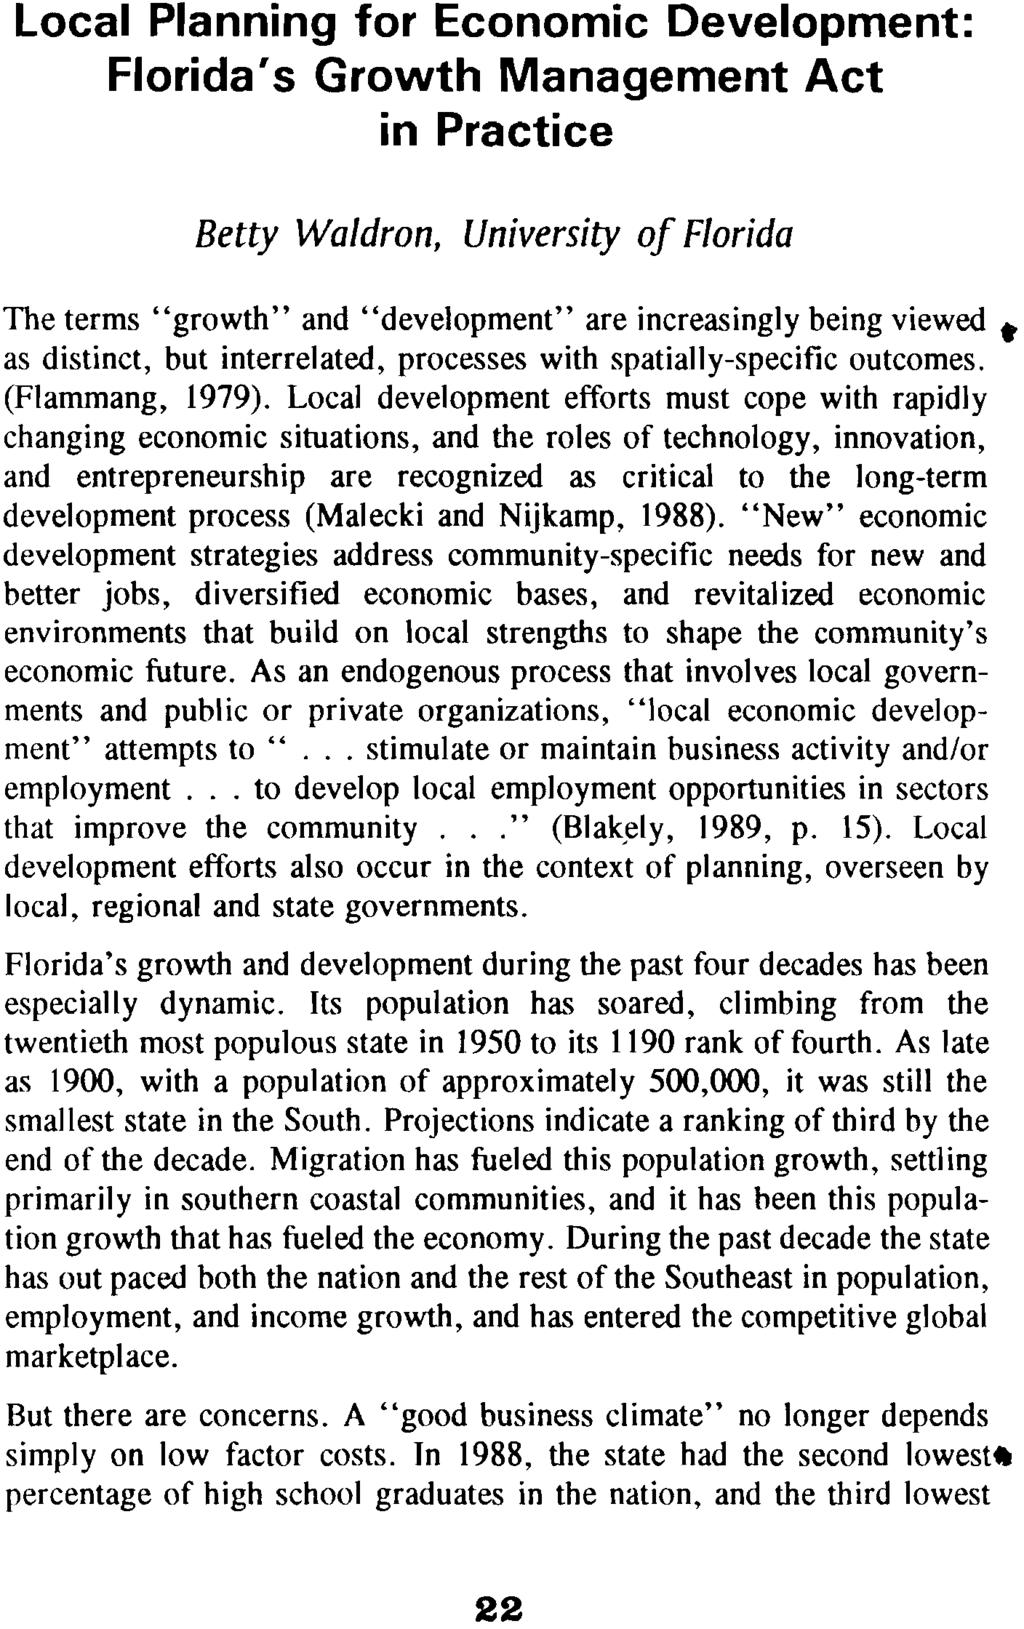 Local Planning for Economic Development: Florida's Growth Management Act in Practice Betty Waldron, University of Florida The terms "growth" and "development" are increasingly being viewed as